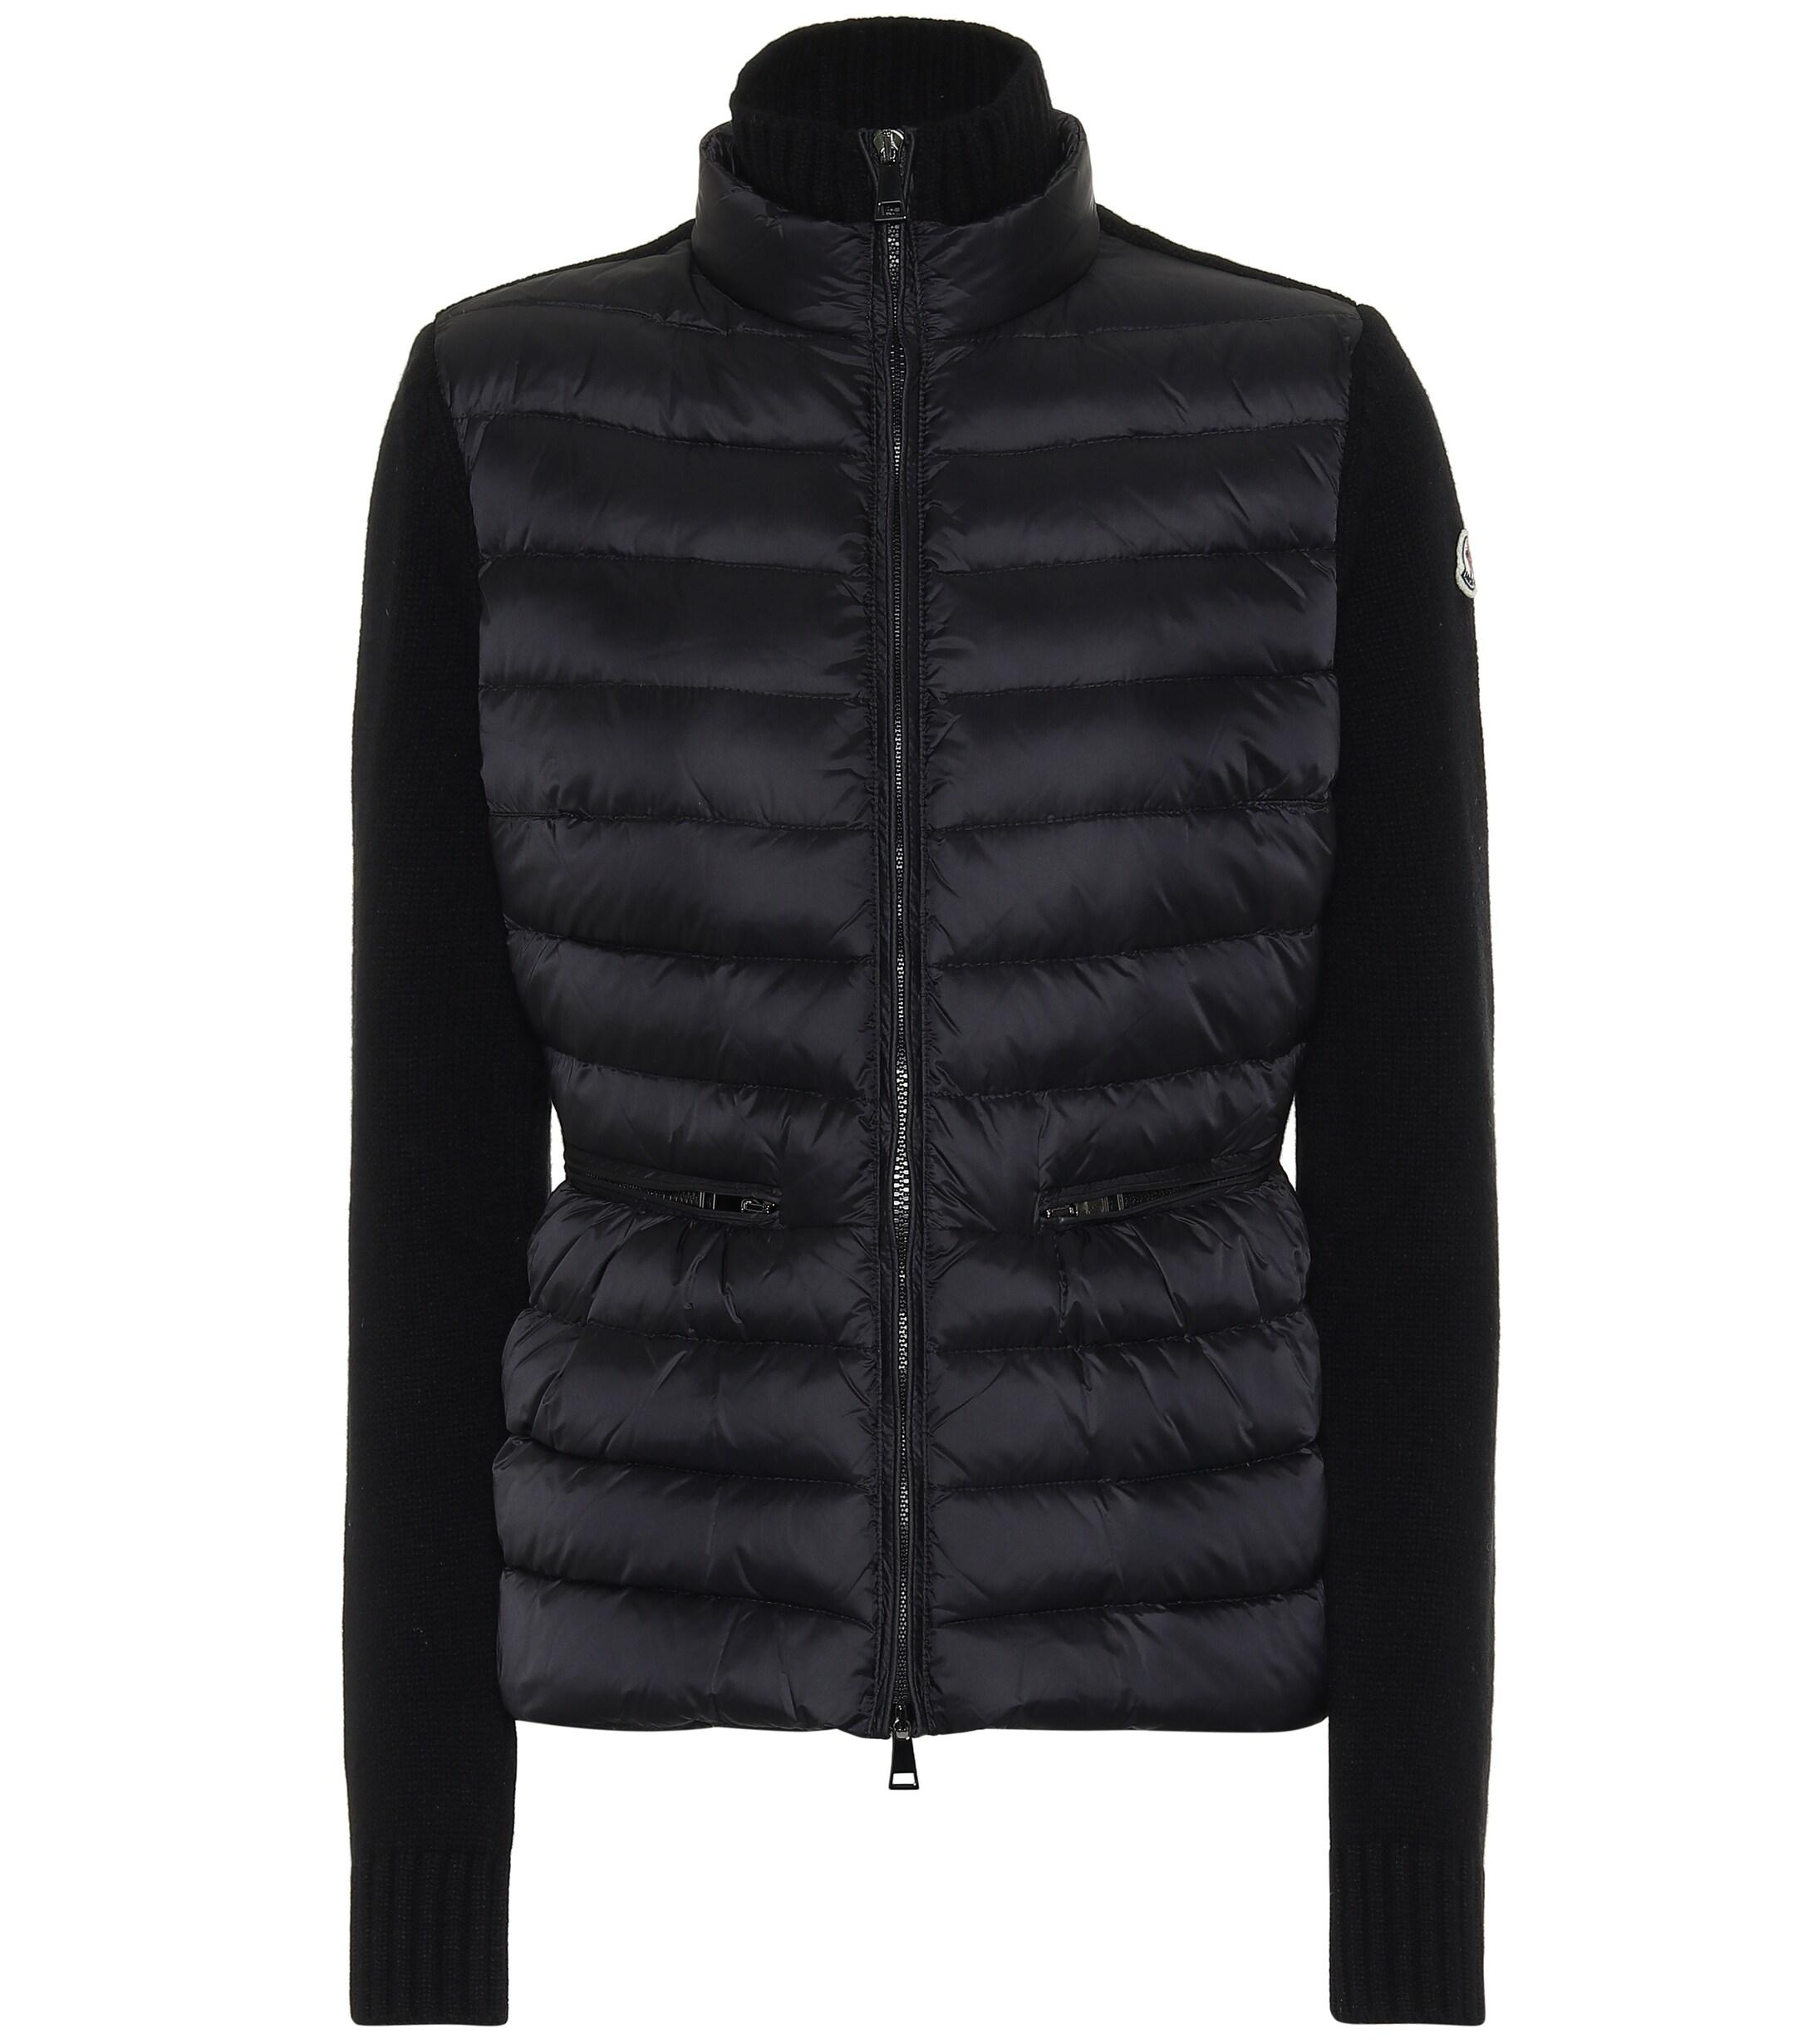 Moncler Wool And Cashmere Down Jacket in Black - Lyst